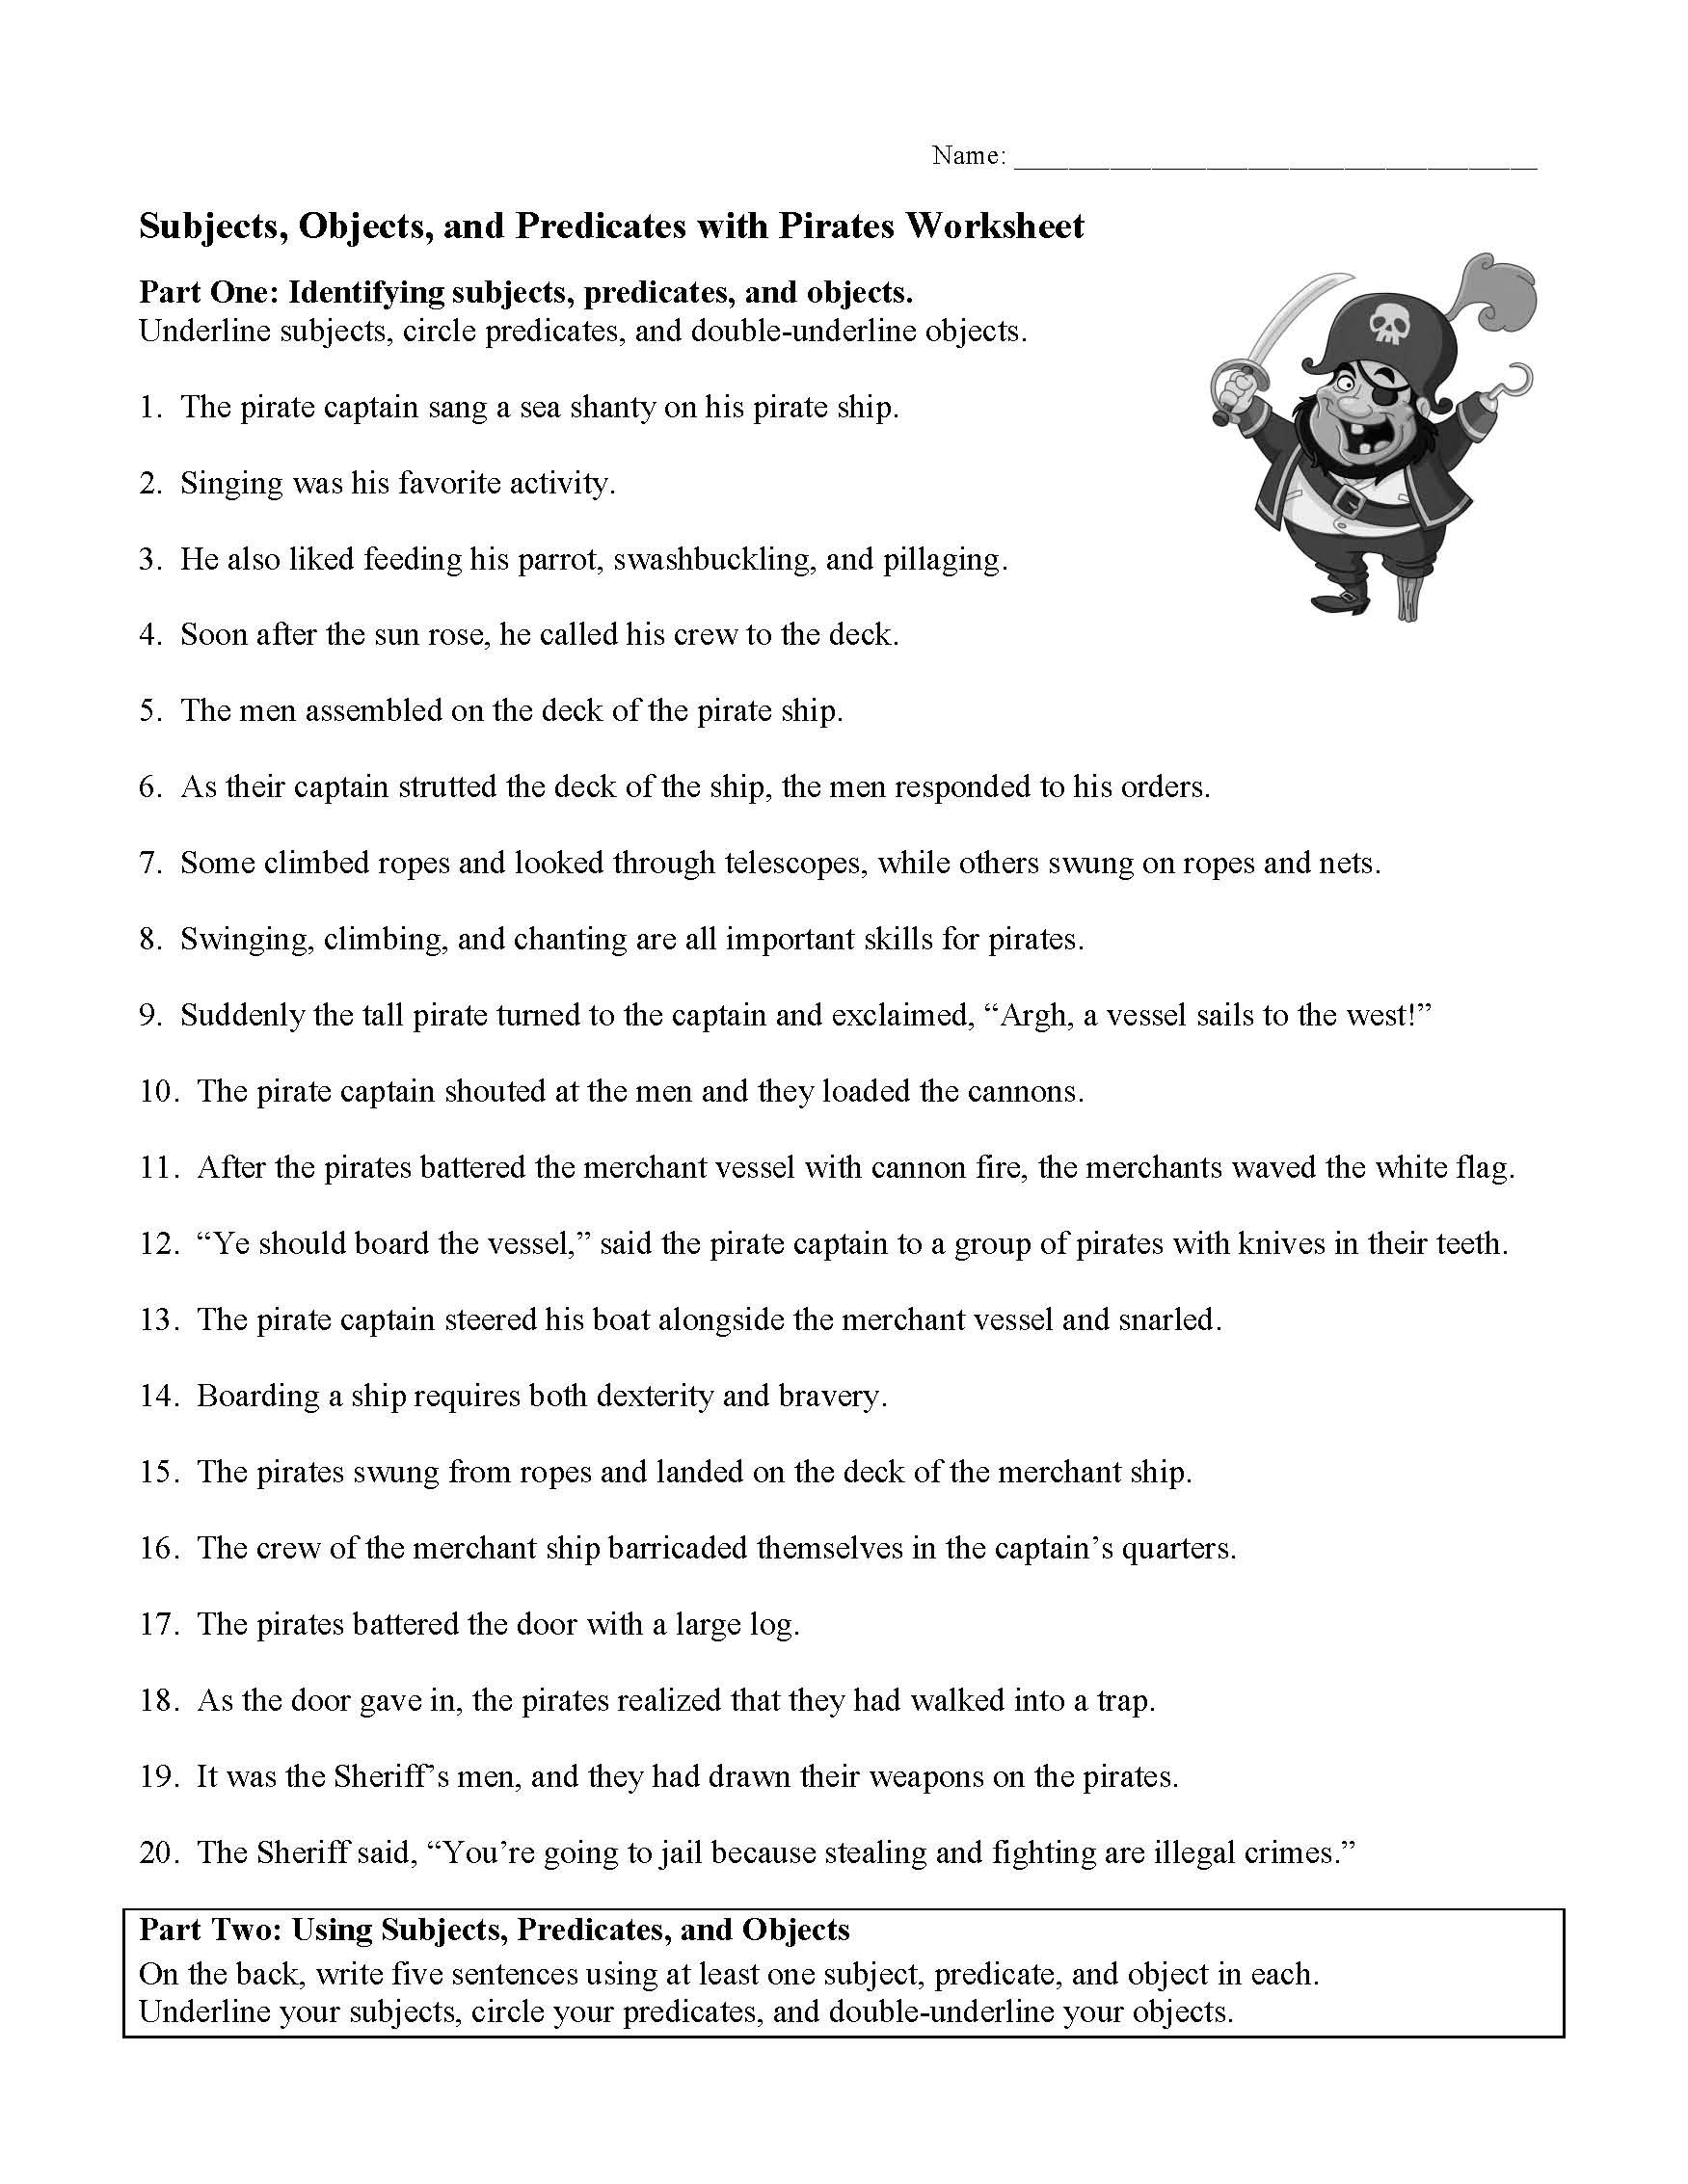 Subjects Objects And Predicates With Pirates Worksheet  Preview Inside Subjects Objects And Predicates With Pirates Worksheet